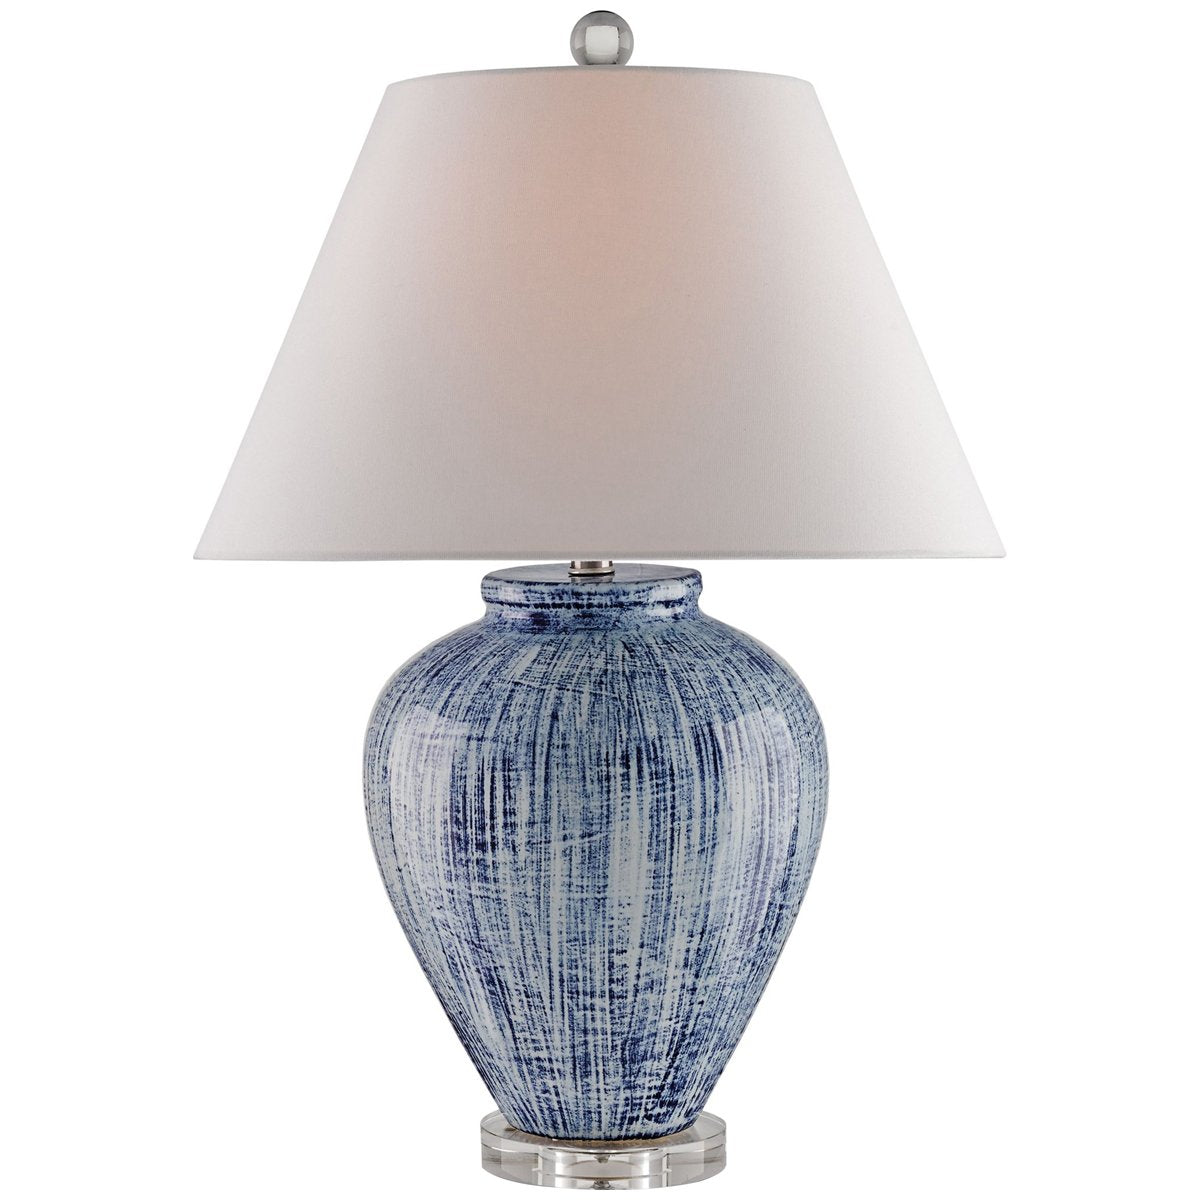 Currey and Company Malaprop Table Lamp